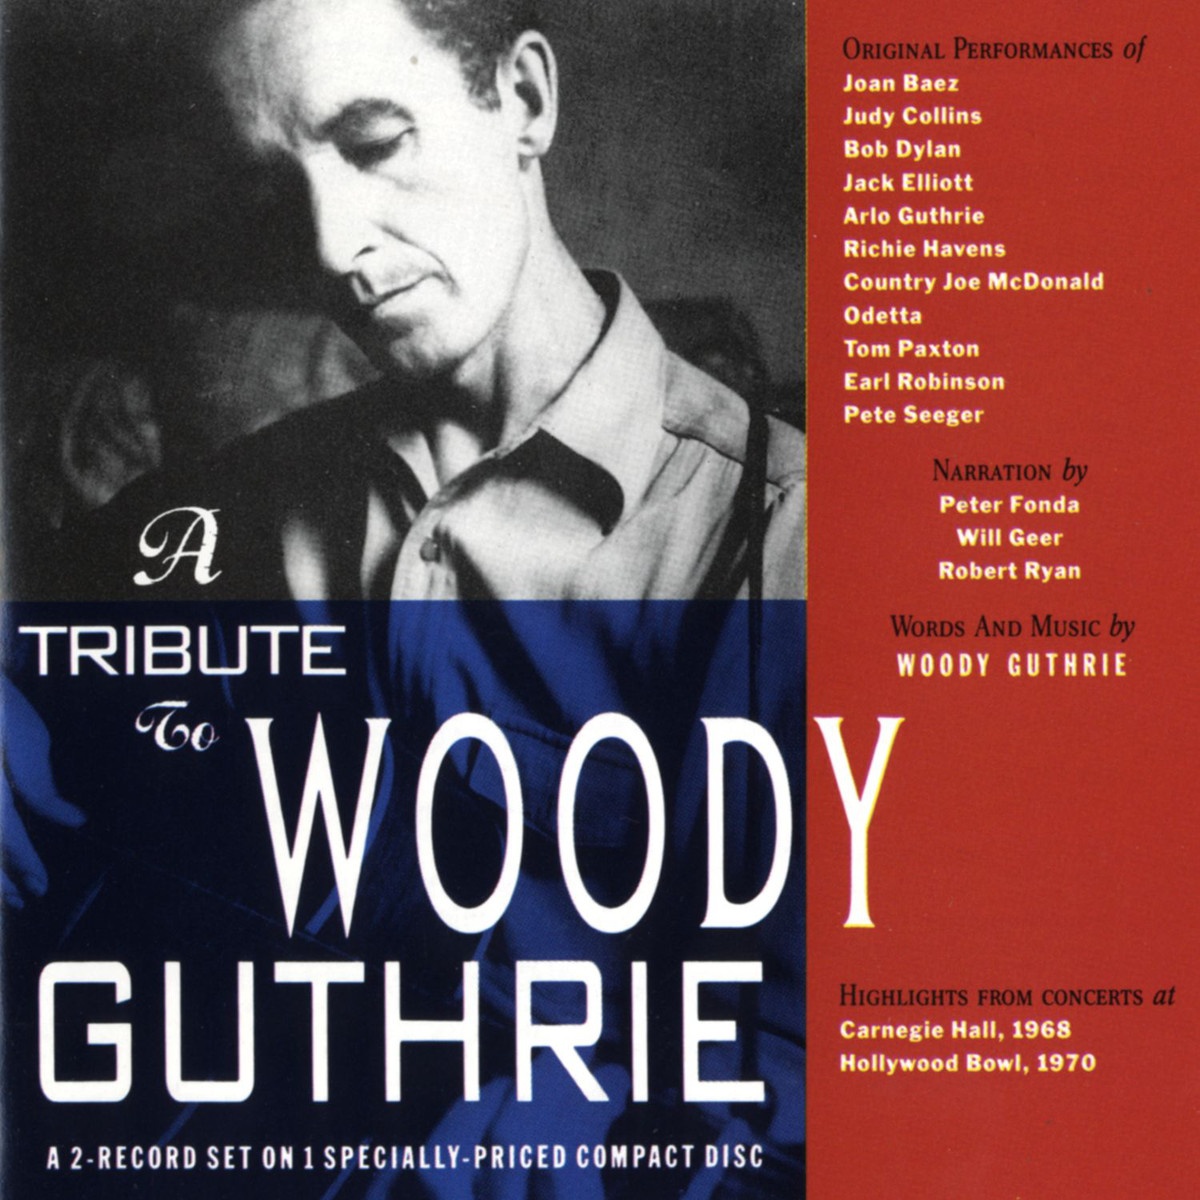 A Tribute to Woody Guthrie